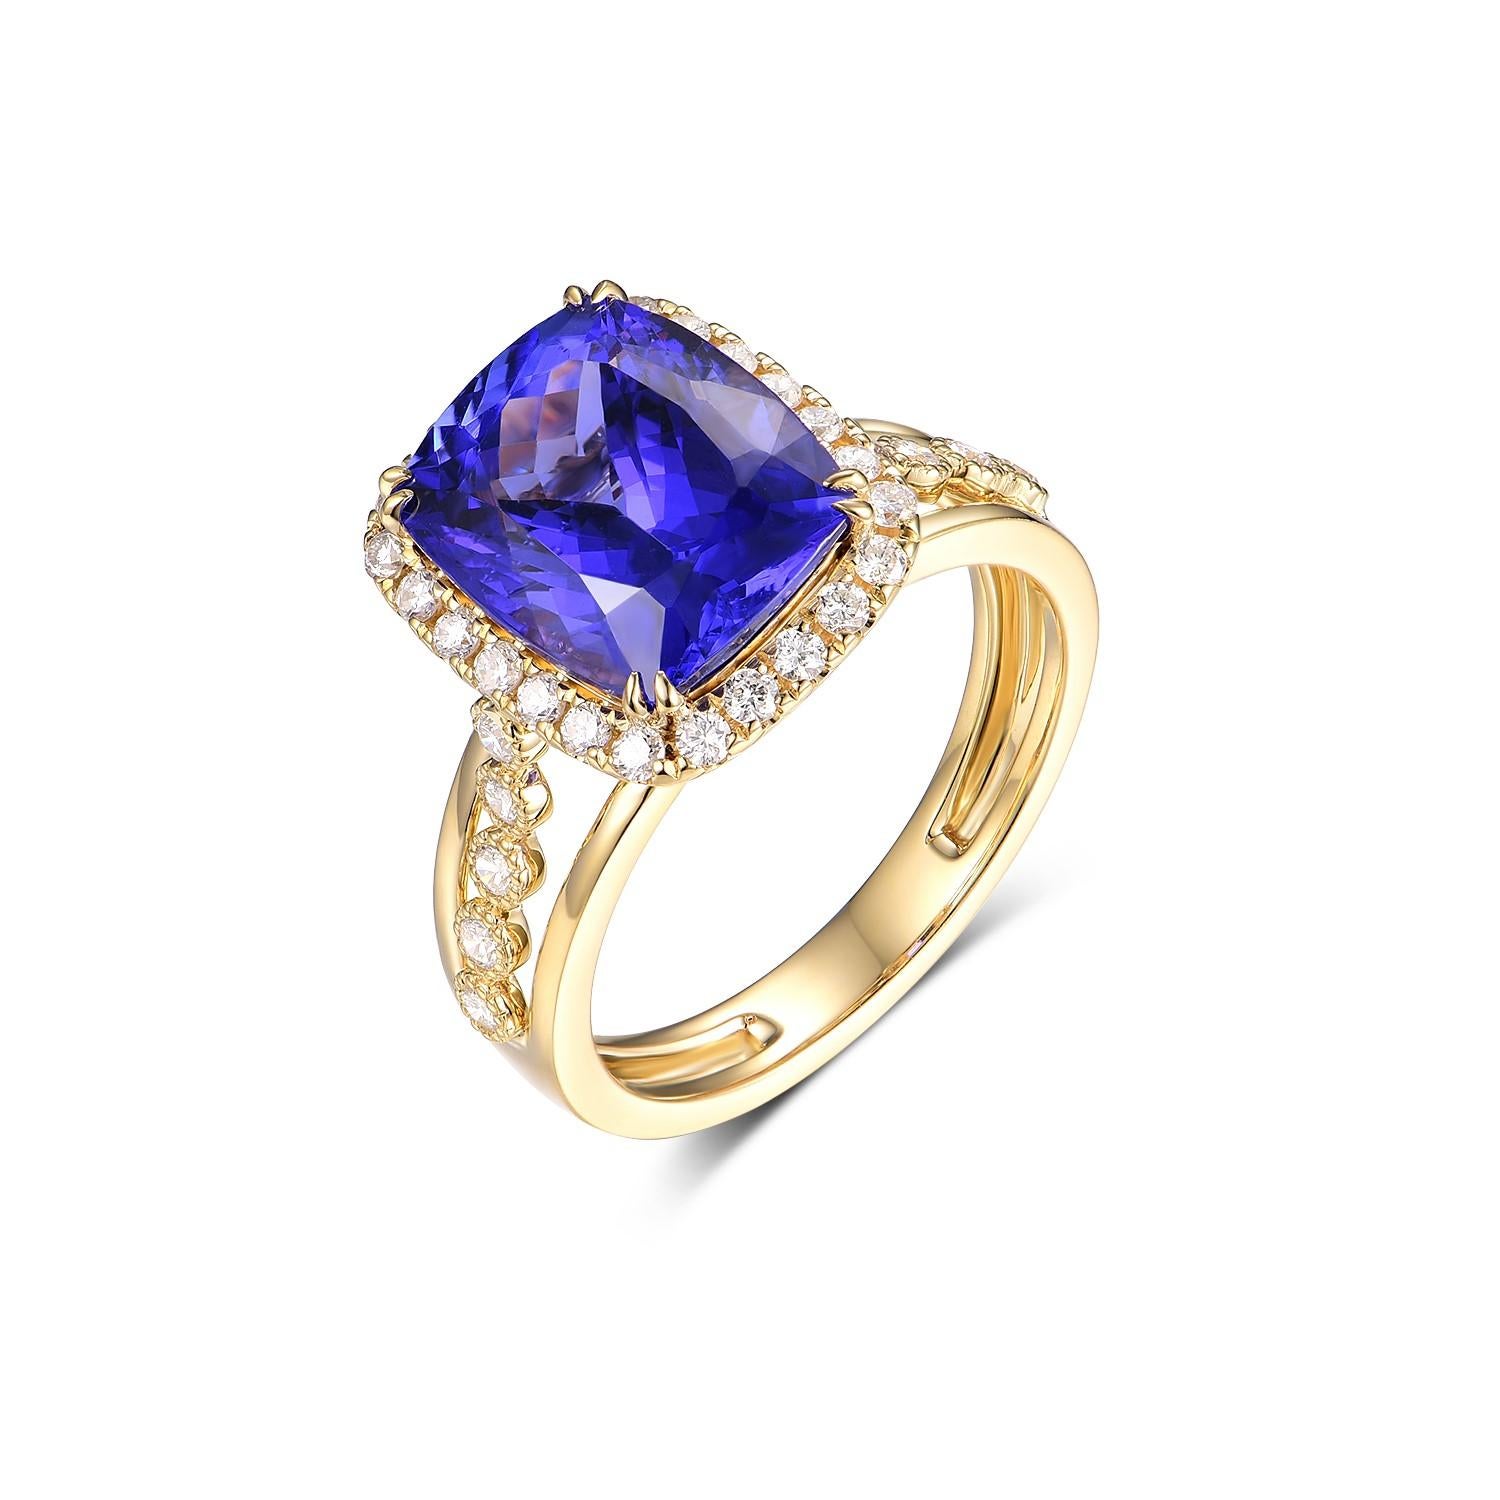 This elegant ring is a celebration of color and craftsmanship, featuring a stunning 5.31 carat Tanzanite as its centerpiece. The Tanzanite's vivid blue and violet hues are beautifully complemented by the rich warmth of the 18 karat yellow gold